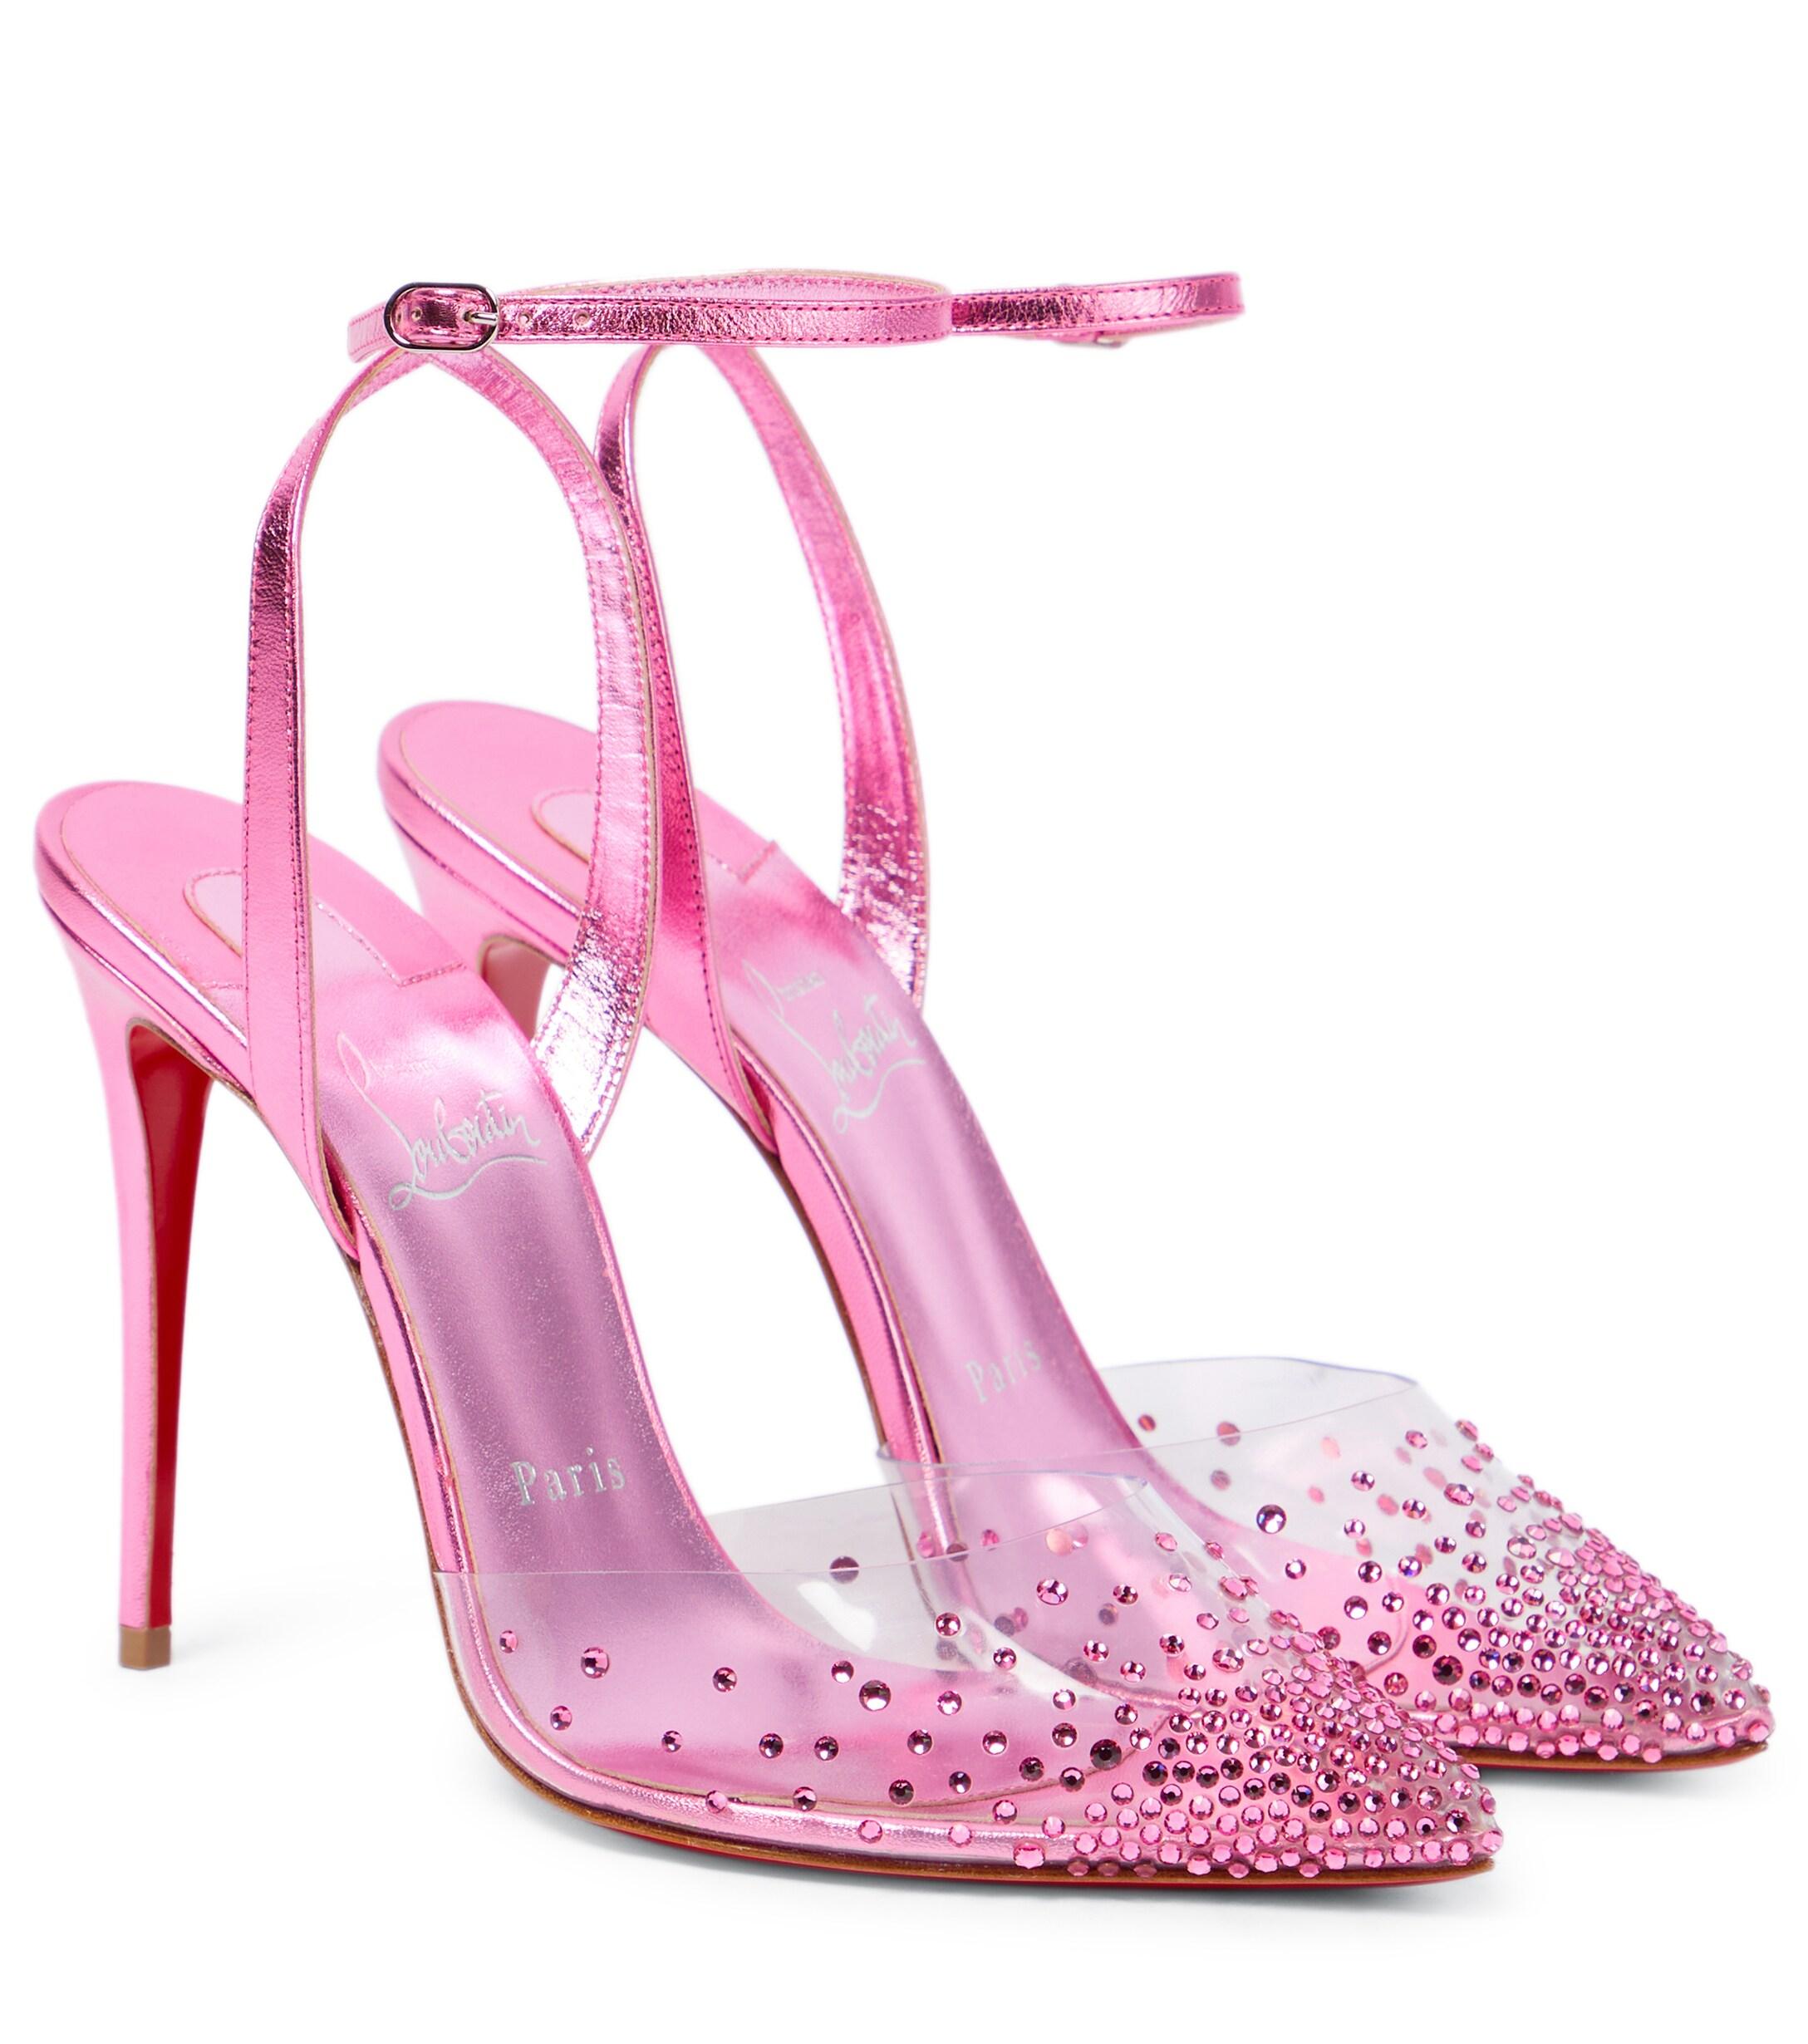 Christian Louboutin Spikaqueen 100 Embellished Pvc Pumps in Pink | Lyst